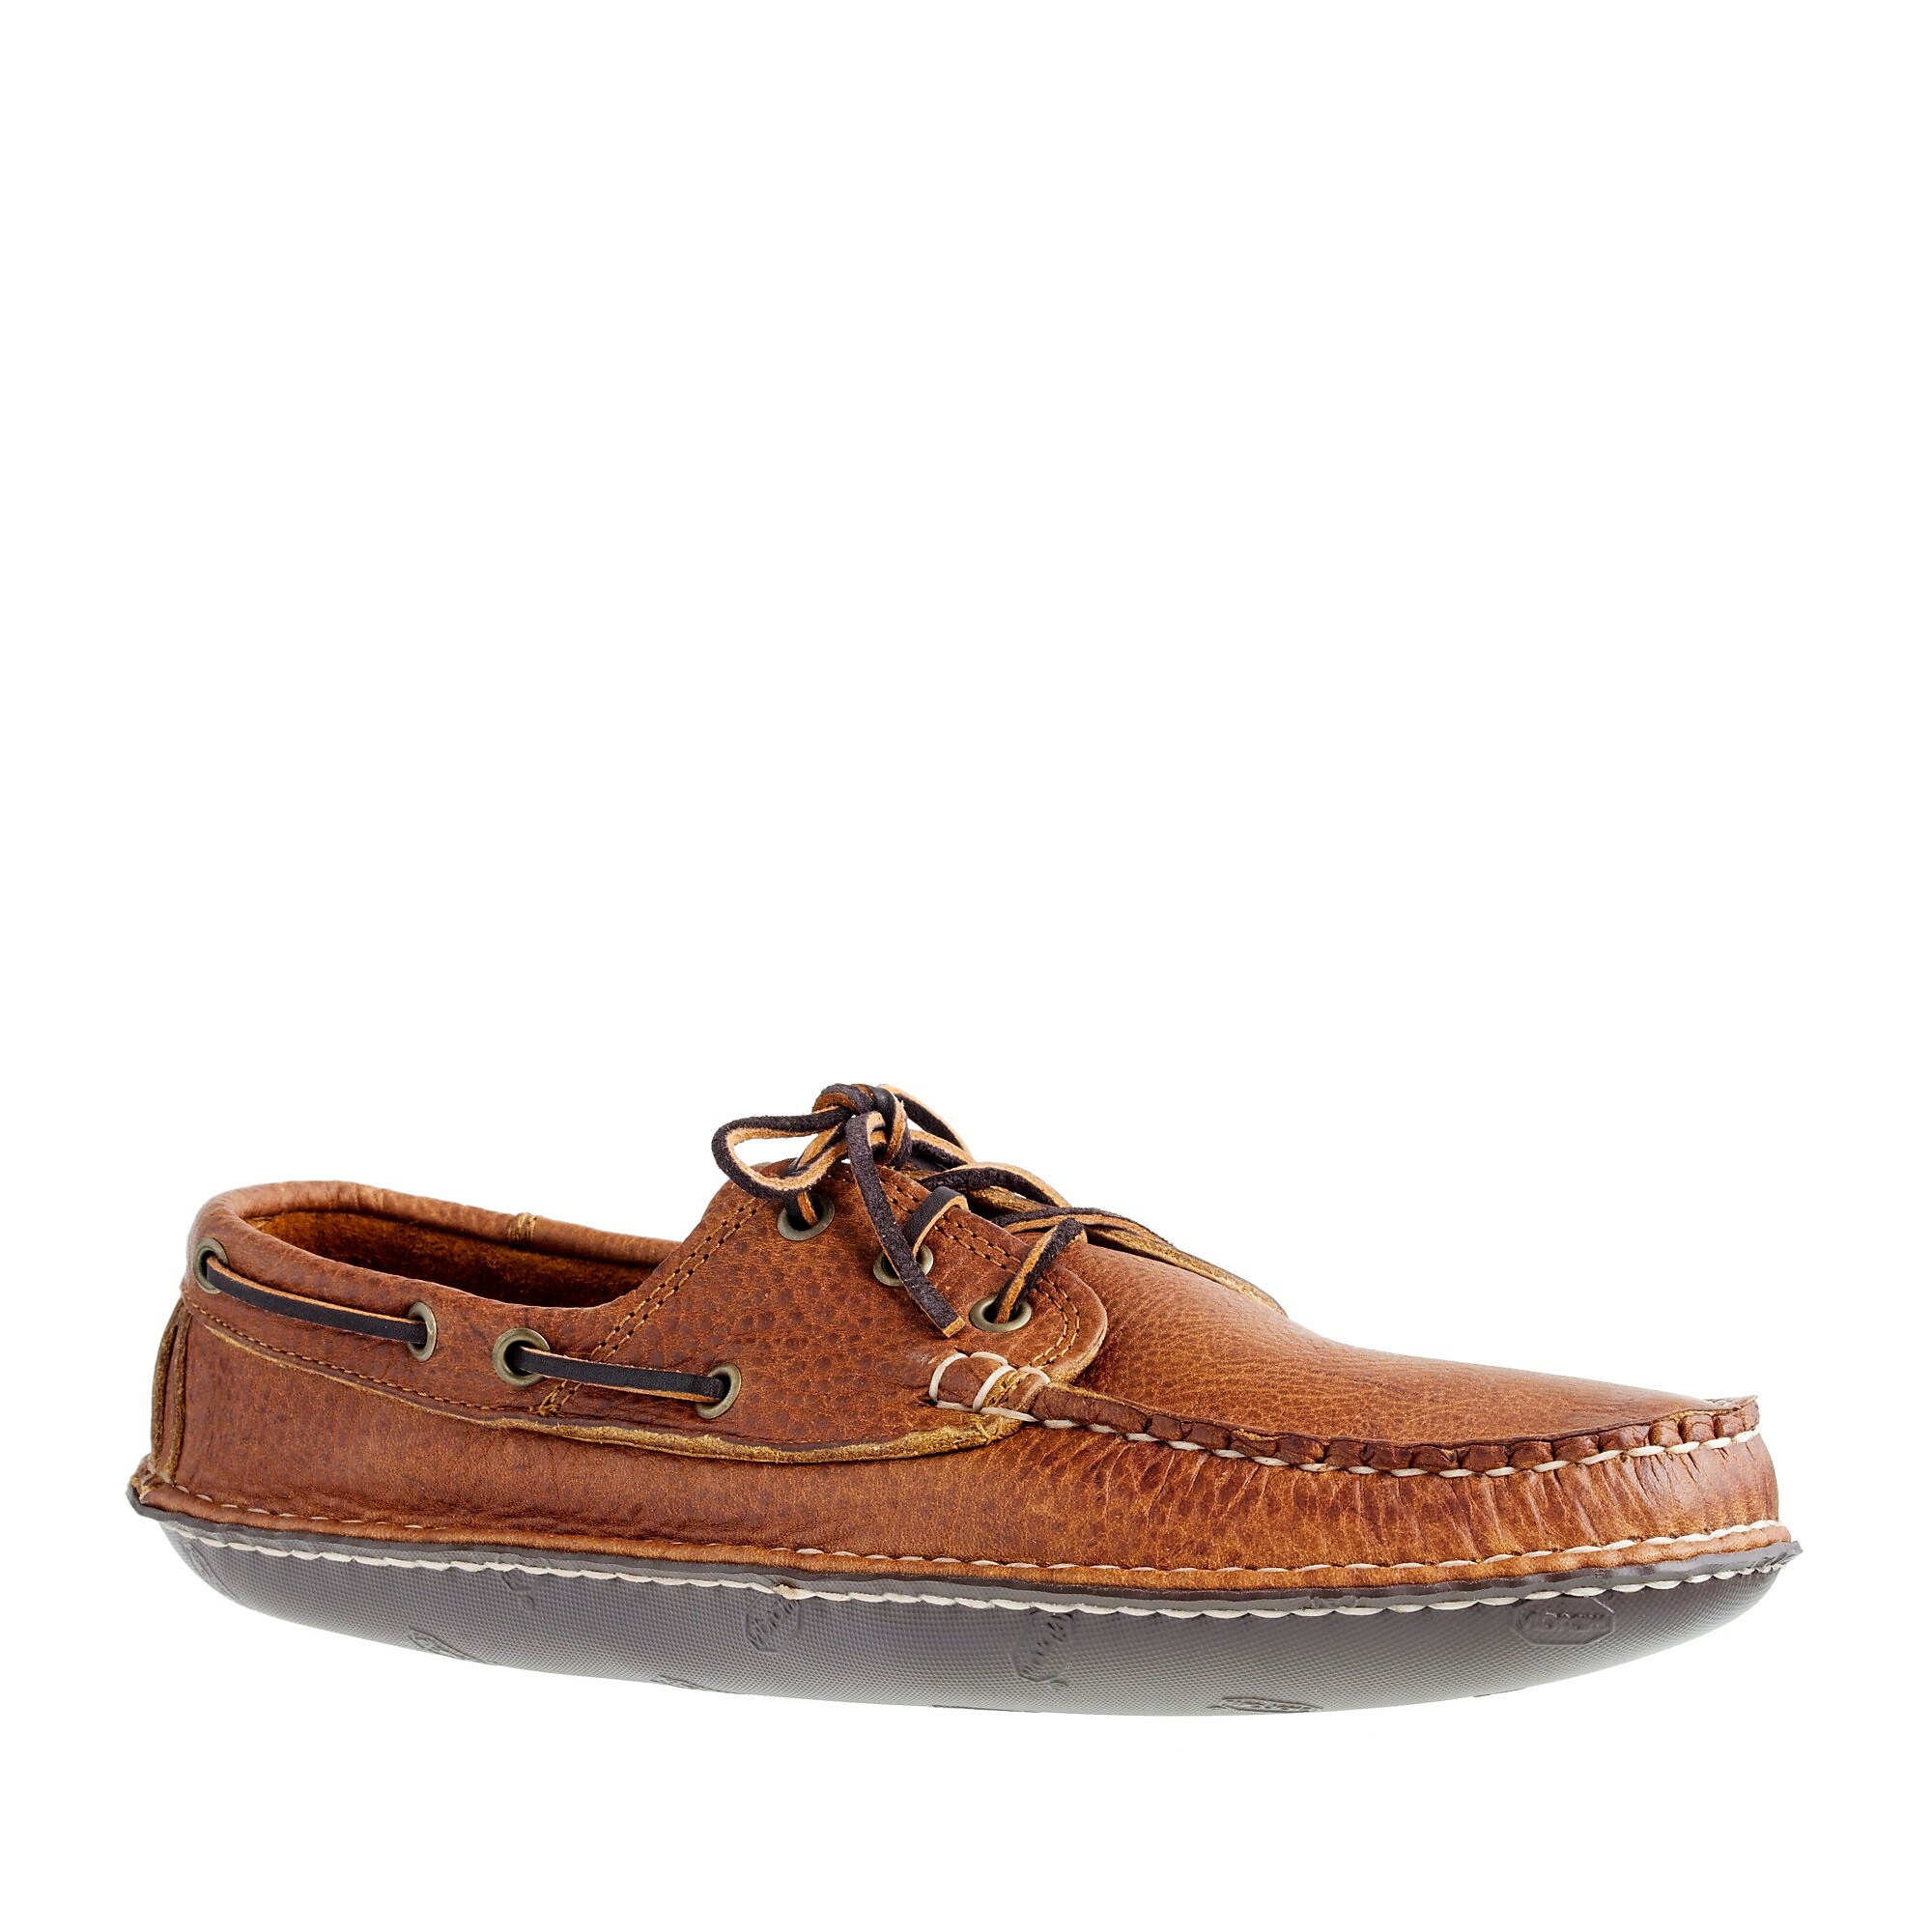 Men's Quoddy® Grizzly leather boat moccasins : Men casual shoes | J.Crew